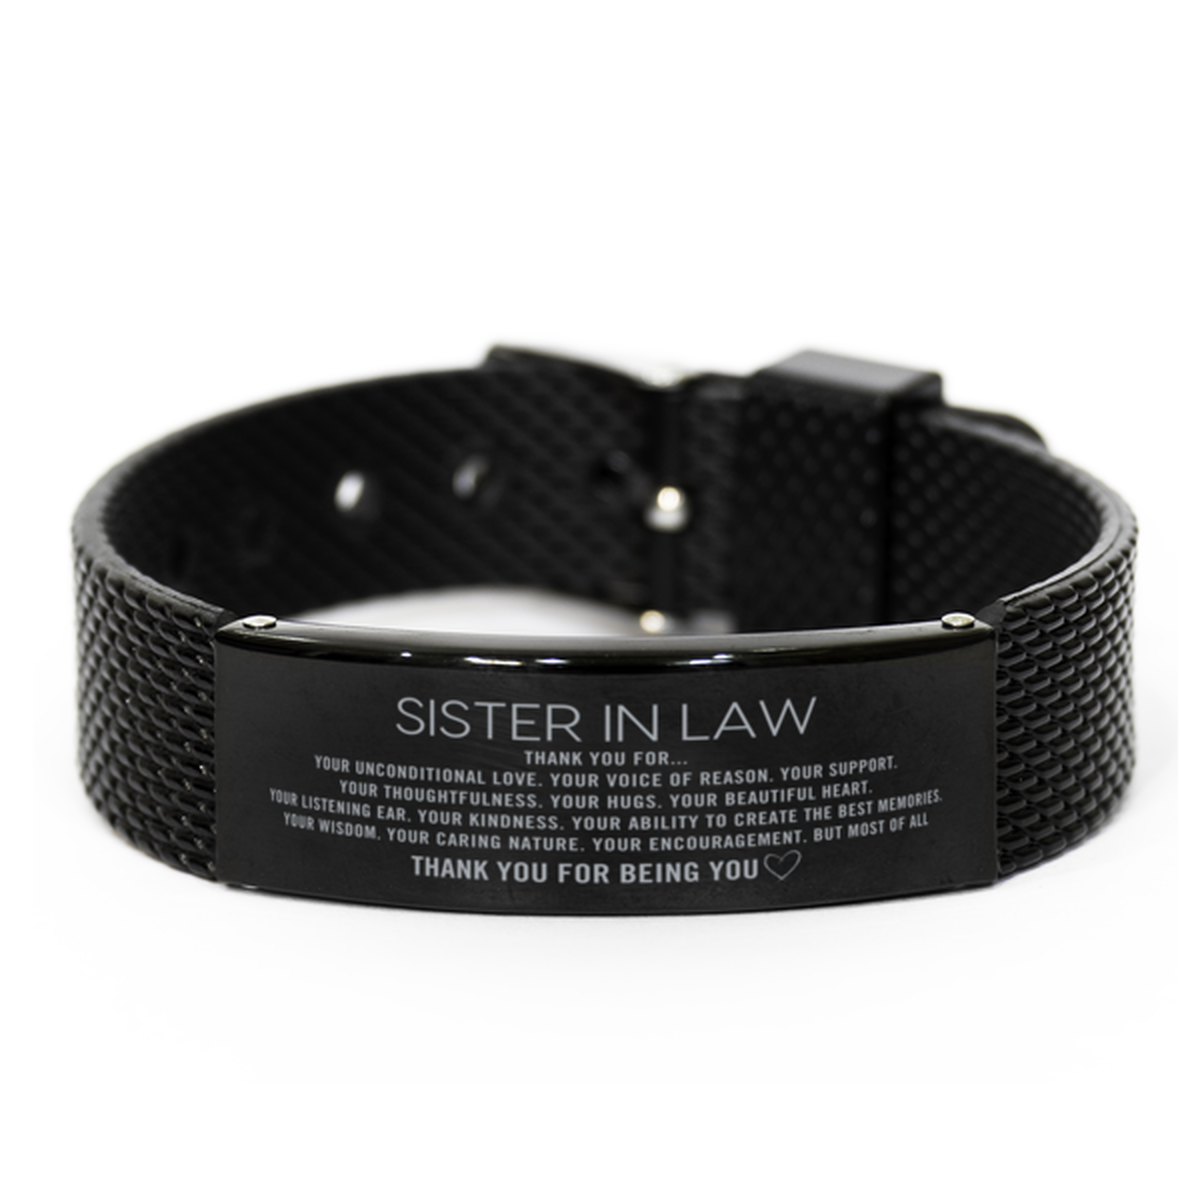 Sister In Law Black Shark Mesh Bracelet Custom, Engraved Gifts For Sister In Law Christmas Graduation Birthday Gifts for Men Women Sister In Law Thank you for Your unconditional love